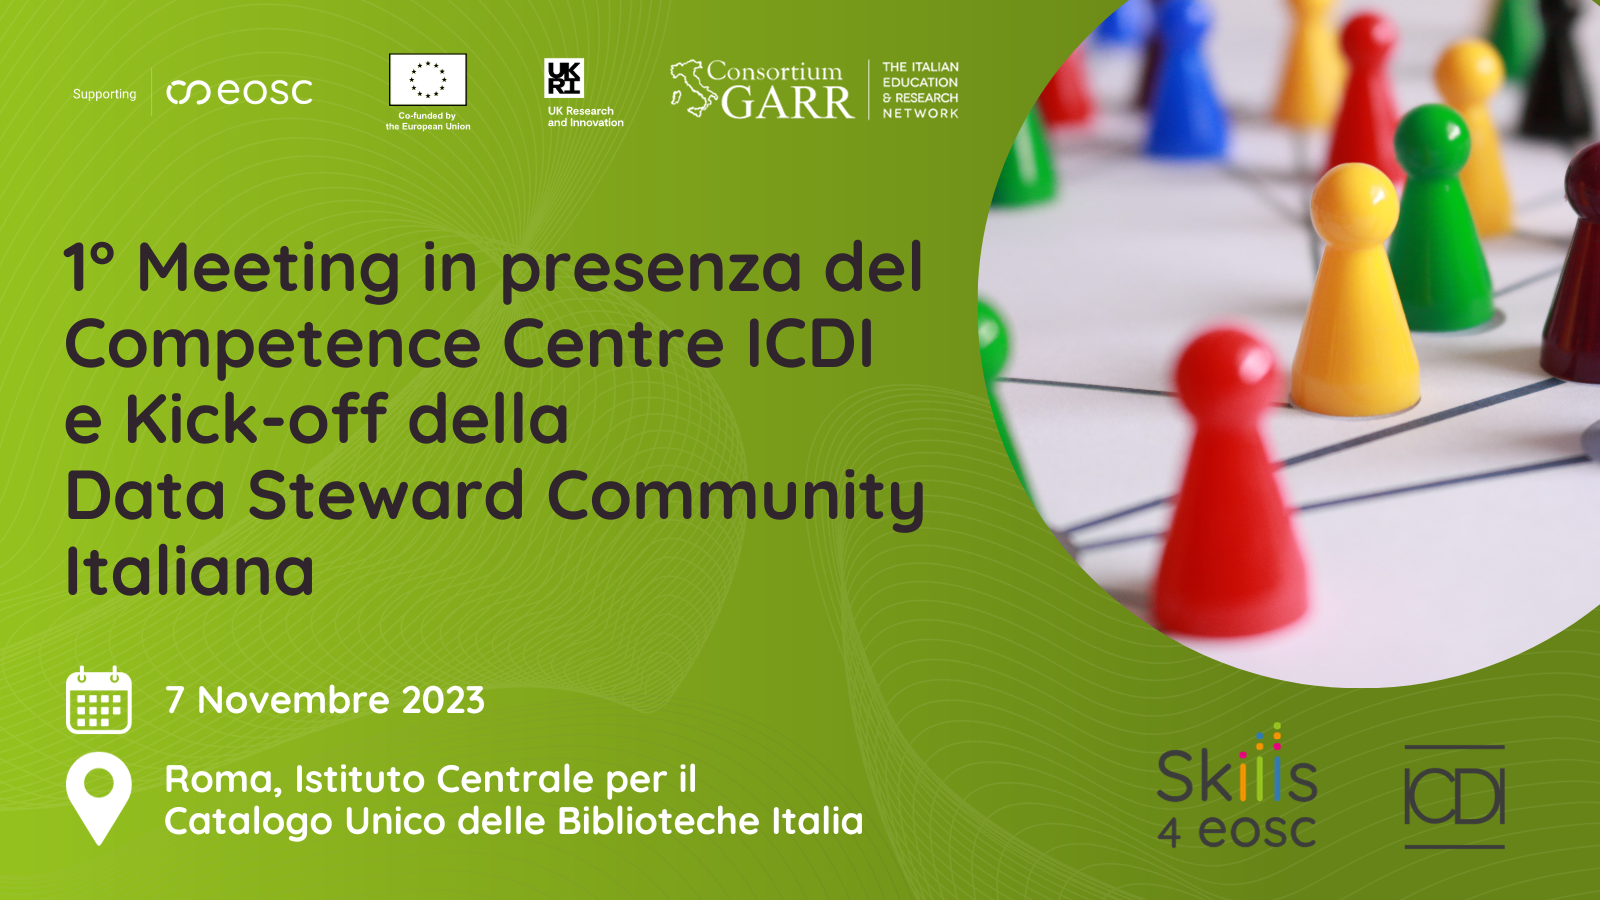 First in-person meeting of the ICDI Competence Center and launch of the Data Steward Community in Italy